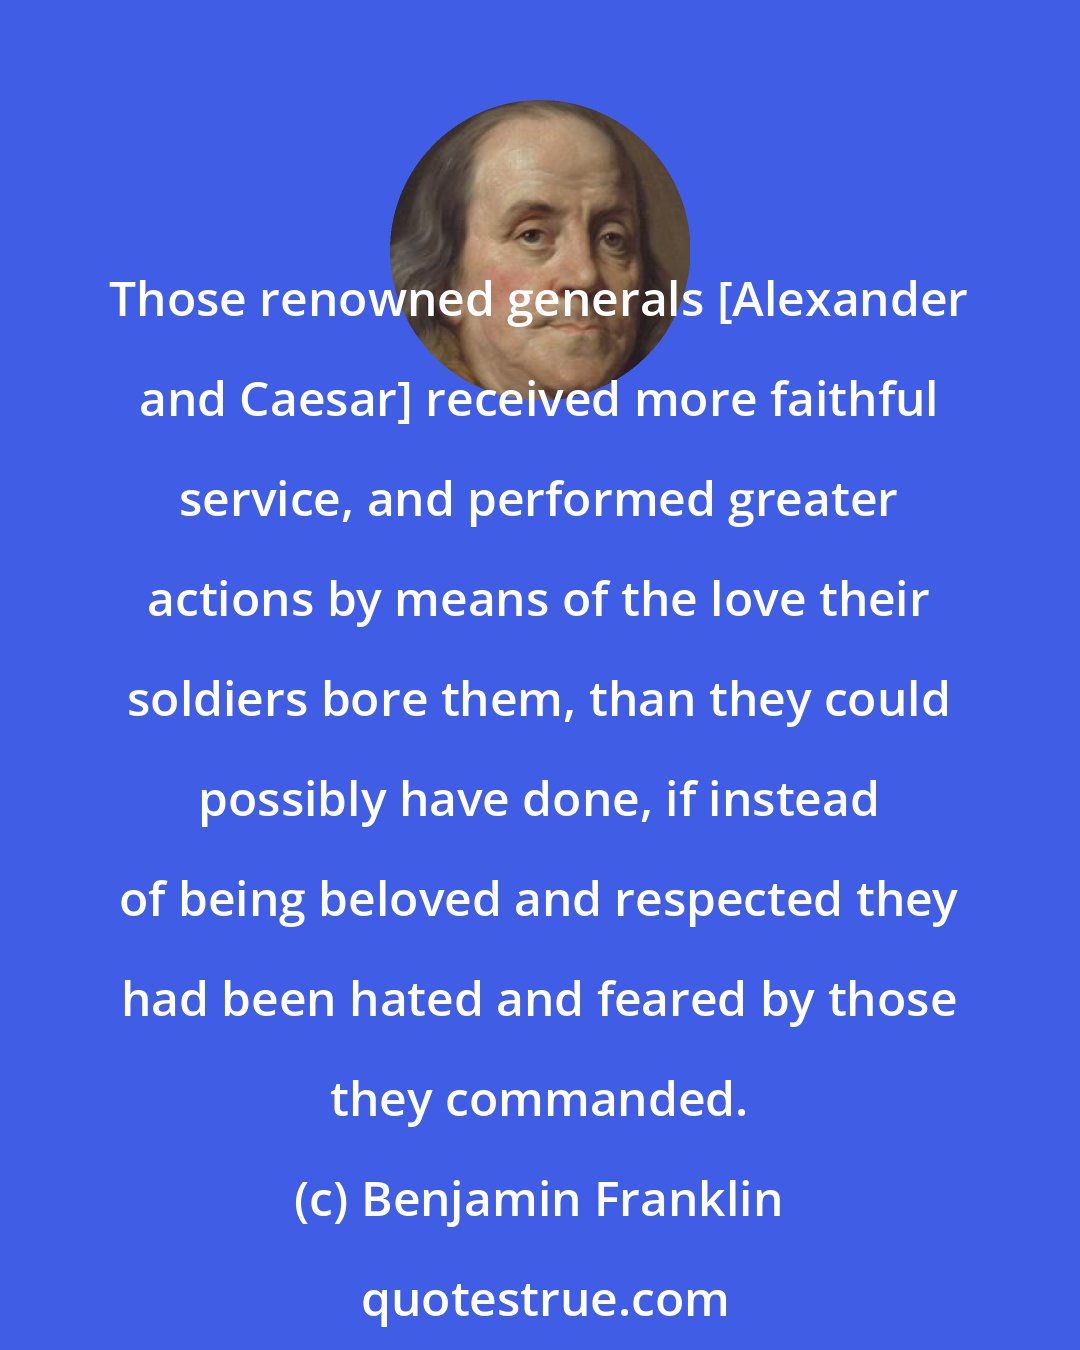 Benjamin Franklin: Those renowned generals [Alexander and Caesar] received more faithful service, and performed greater actions by means of the love their soldiers bore them, than they could possibly have done, if instead of being beloved and respected they had been hated and feared by those they commanded.